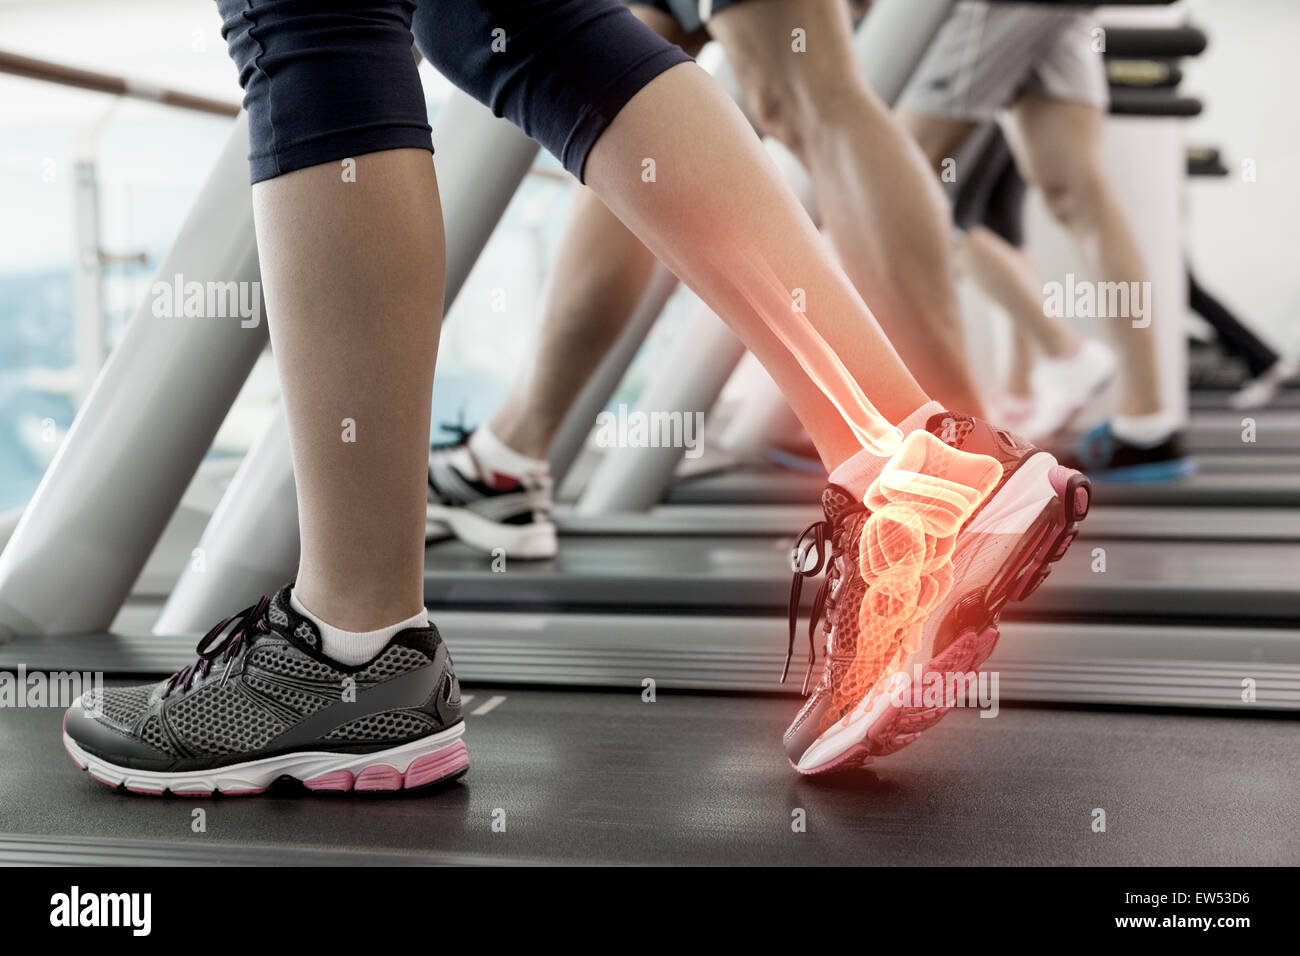 Highlighted ankle of woman on treadmill Stock Photo